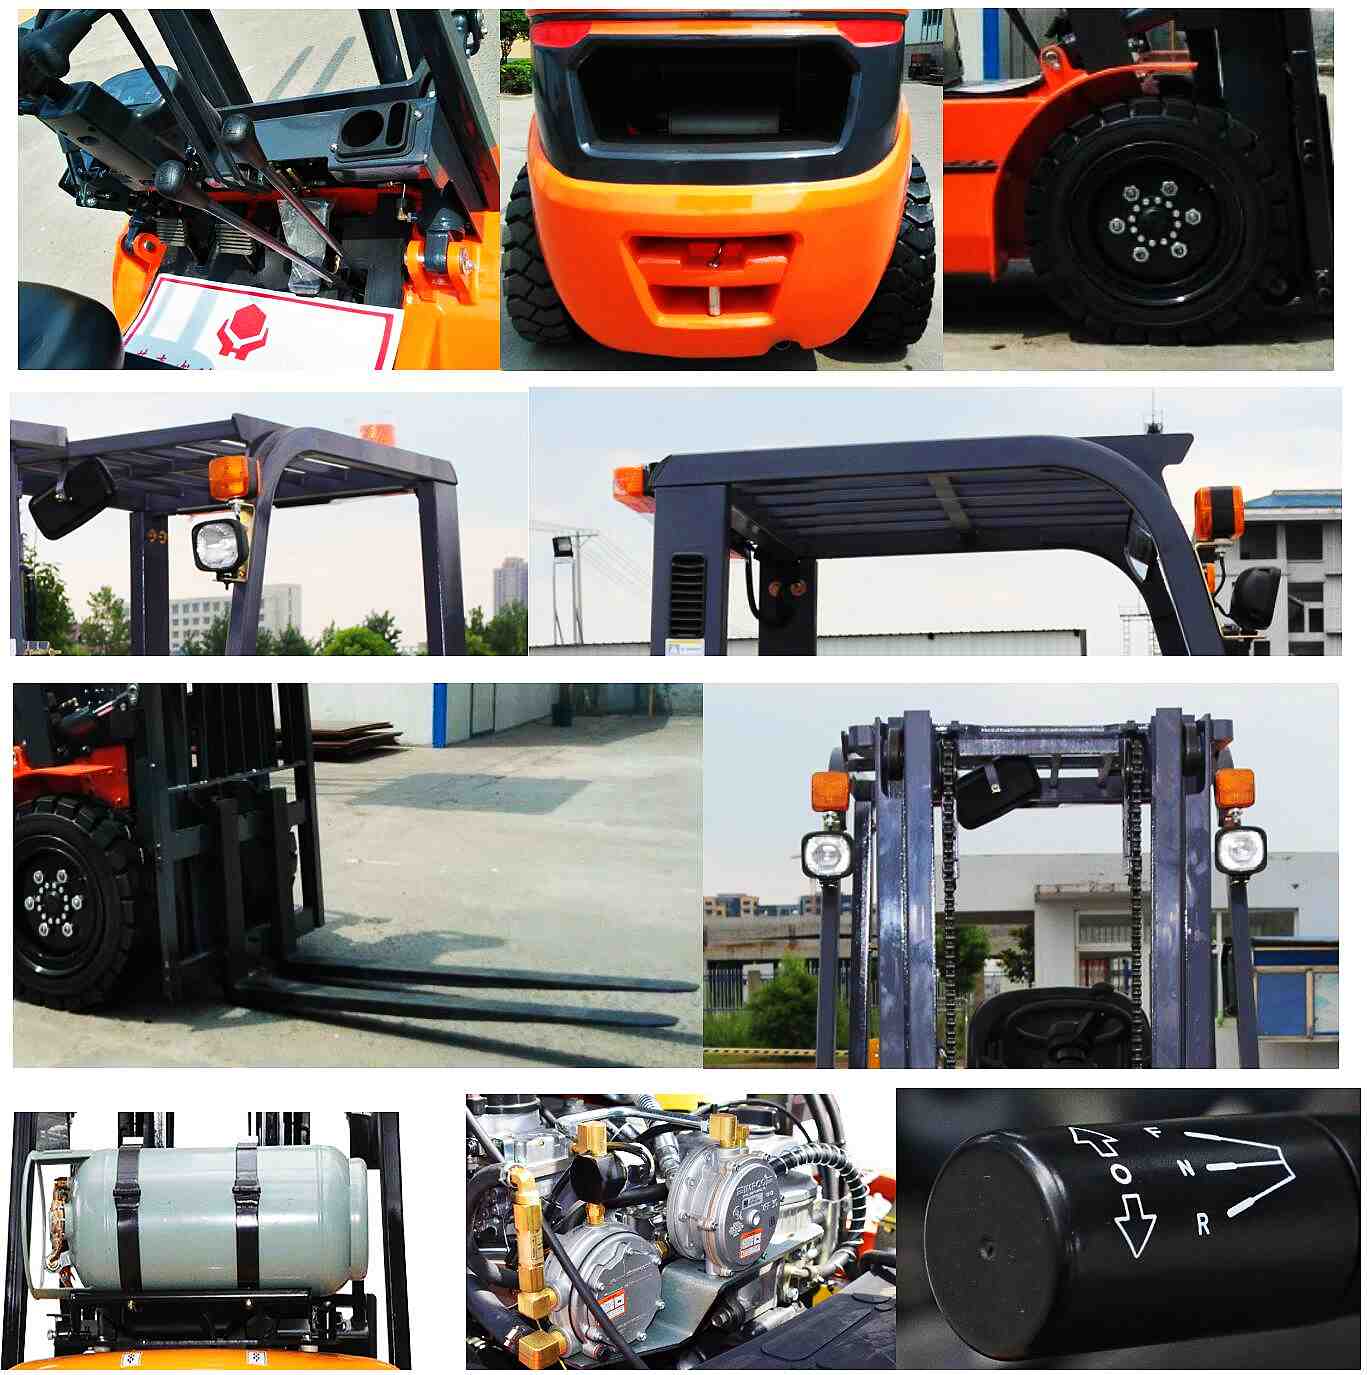 Details of 1.5-4.0 Tons Gasoline and LPG Counterbalance Forklift